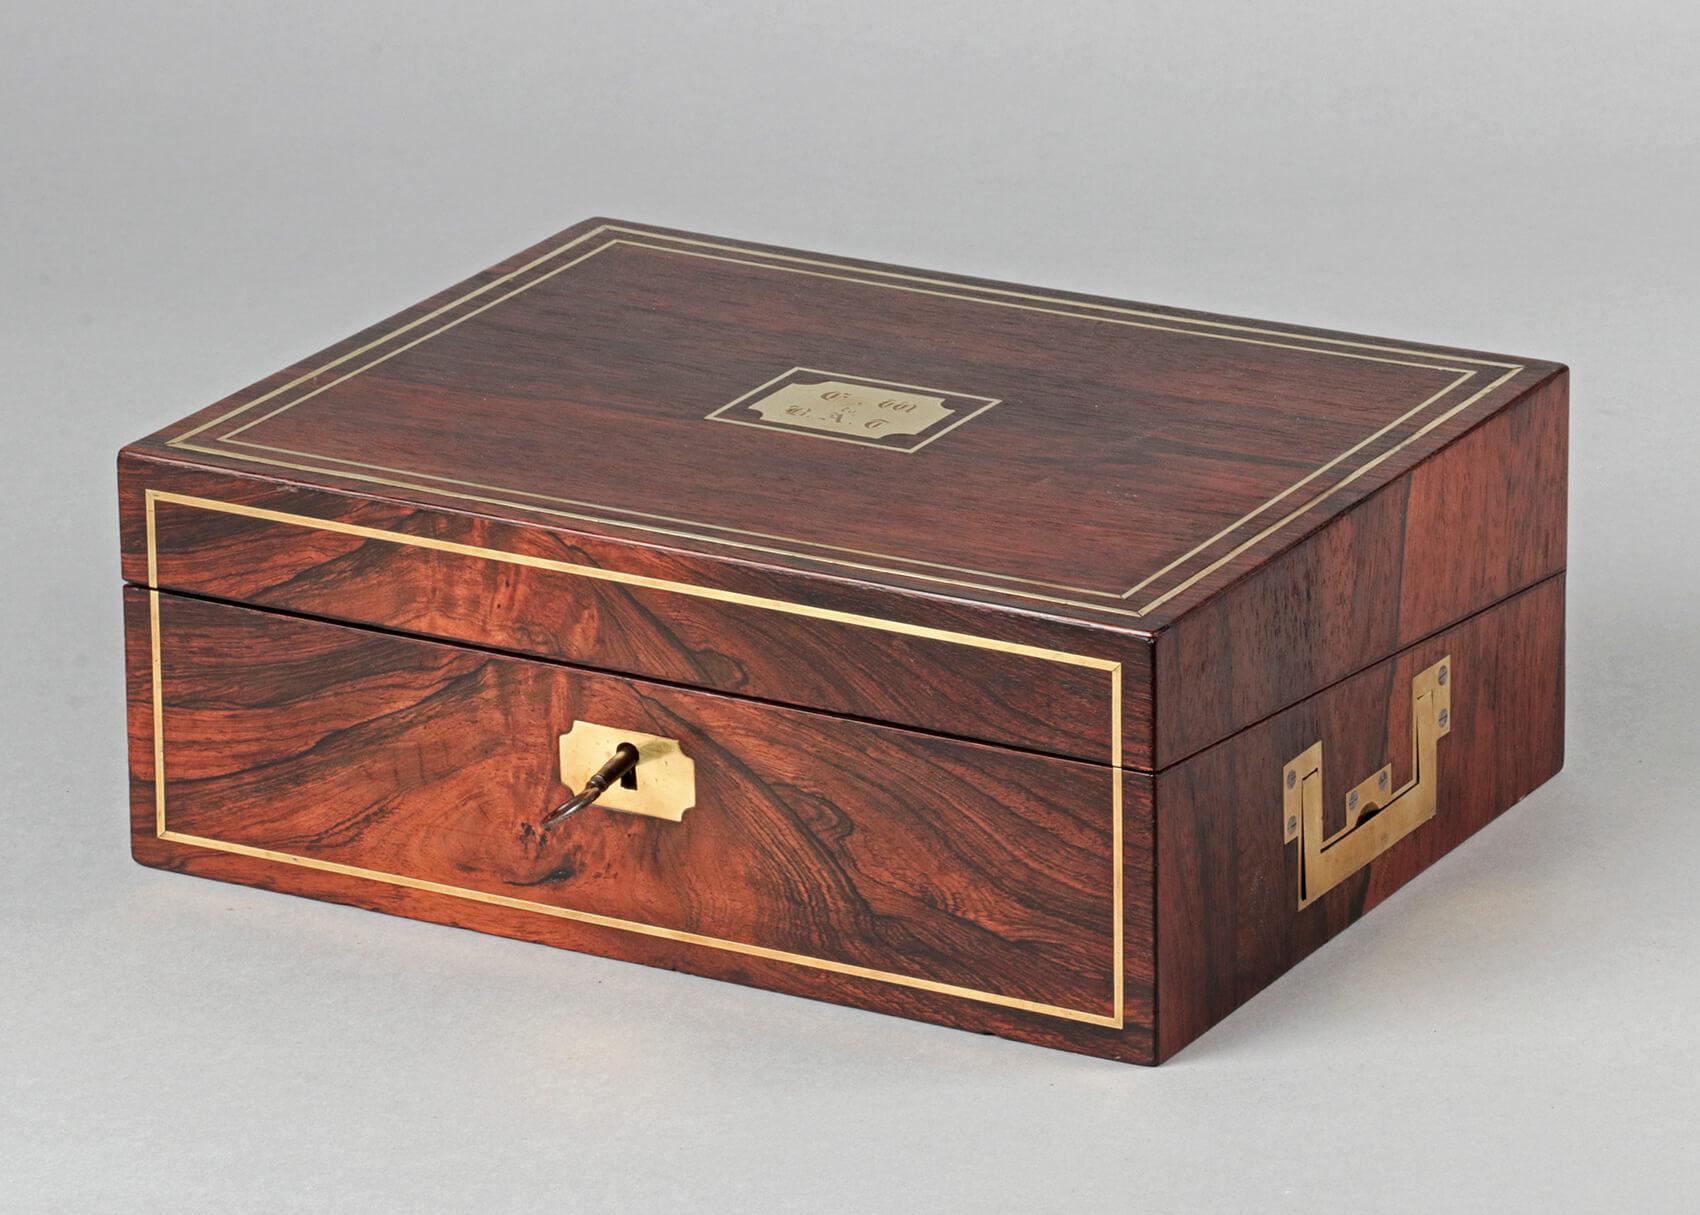 This is an exceptional rosewood writing box, circa 1815 by David Edwards. David Edwards was a box maker who was awarded royal warrants from King George IV and later from Queen Victoria. The beautiful writing slope is veneered in rosewood with brass